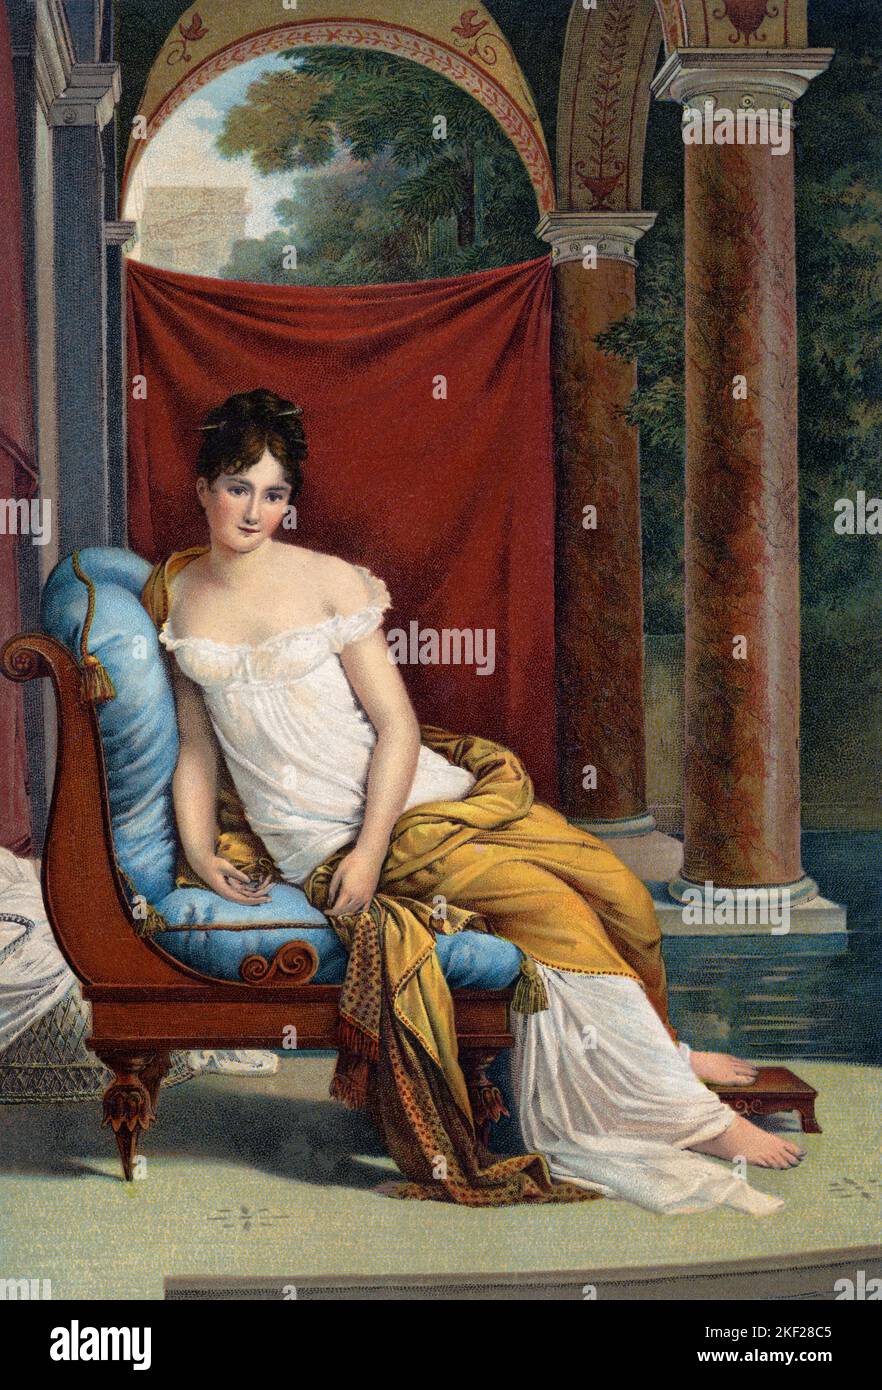 1800s MADAME RECAMIER A GREAT BEAUTY AND SOCIALITE OF HER DAY PAINTED PORTRAIT BY BARON GERARD IN 1802 - ka9400 HAR001 HARS HAPPINESS LEISURE STYLES AND PRIDE PAINTED DERIVATIVE POSTCARD STYLISH BARON CREATIVITY EMPIRE WAIST FASHIONS GERARD JULIETTE MADAME RECAMIER YOUNG ADULT WOMAN 1805 DECOLLETAGE HAR001 OLD FASHIONED SOCIALITE Stock Photo